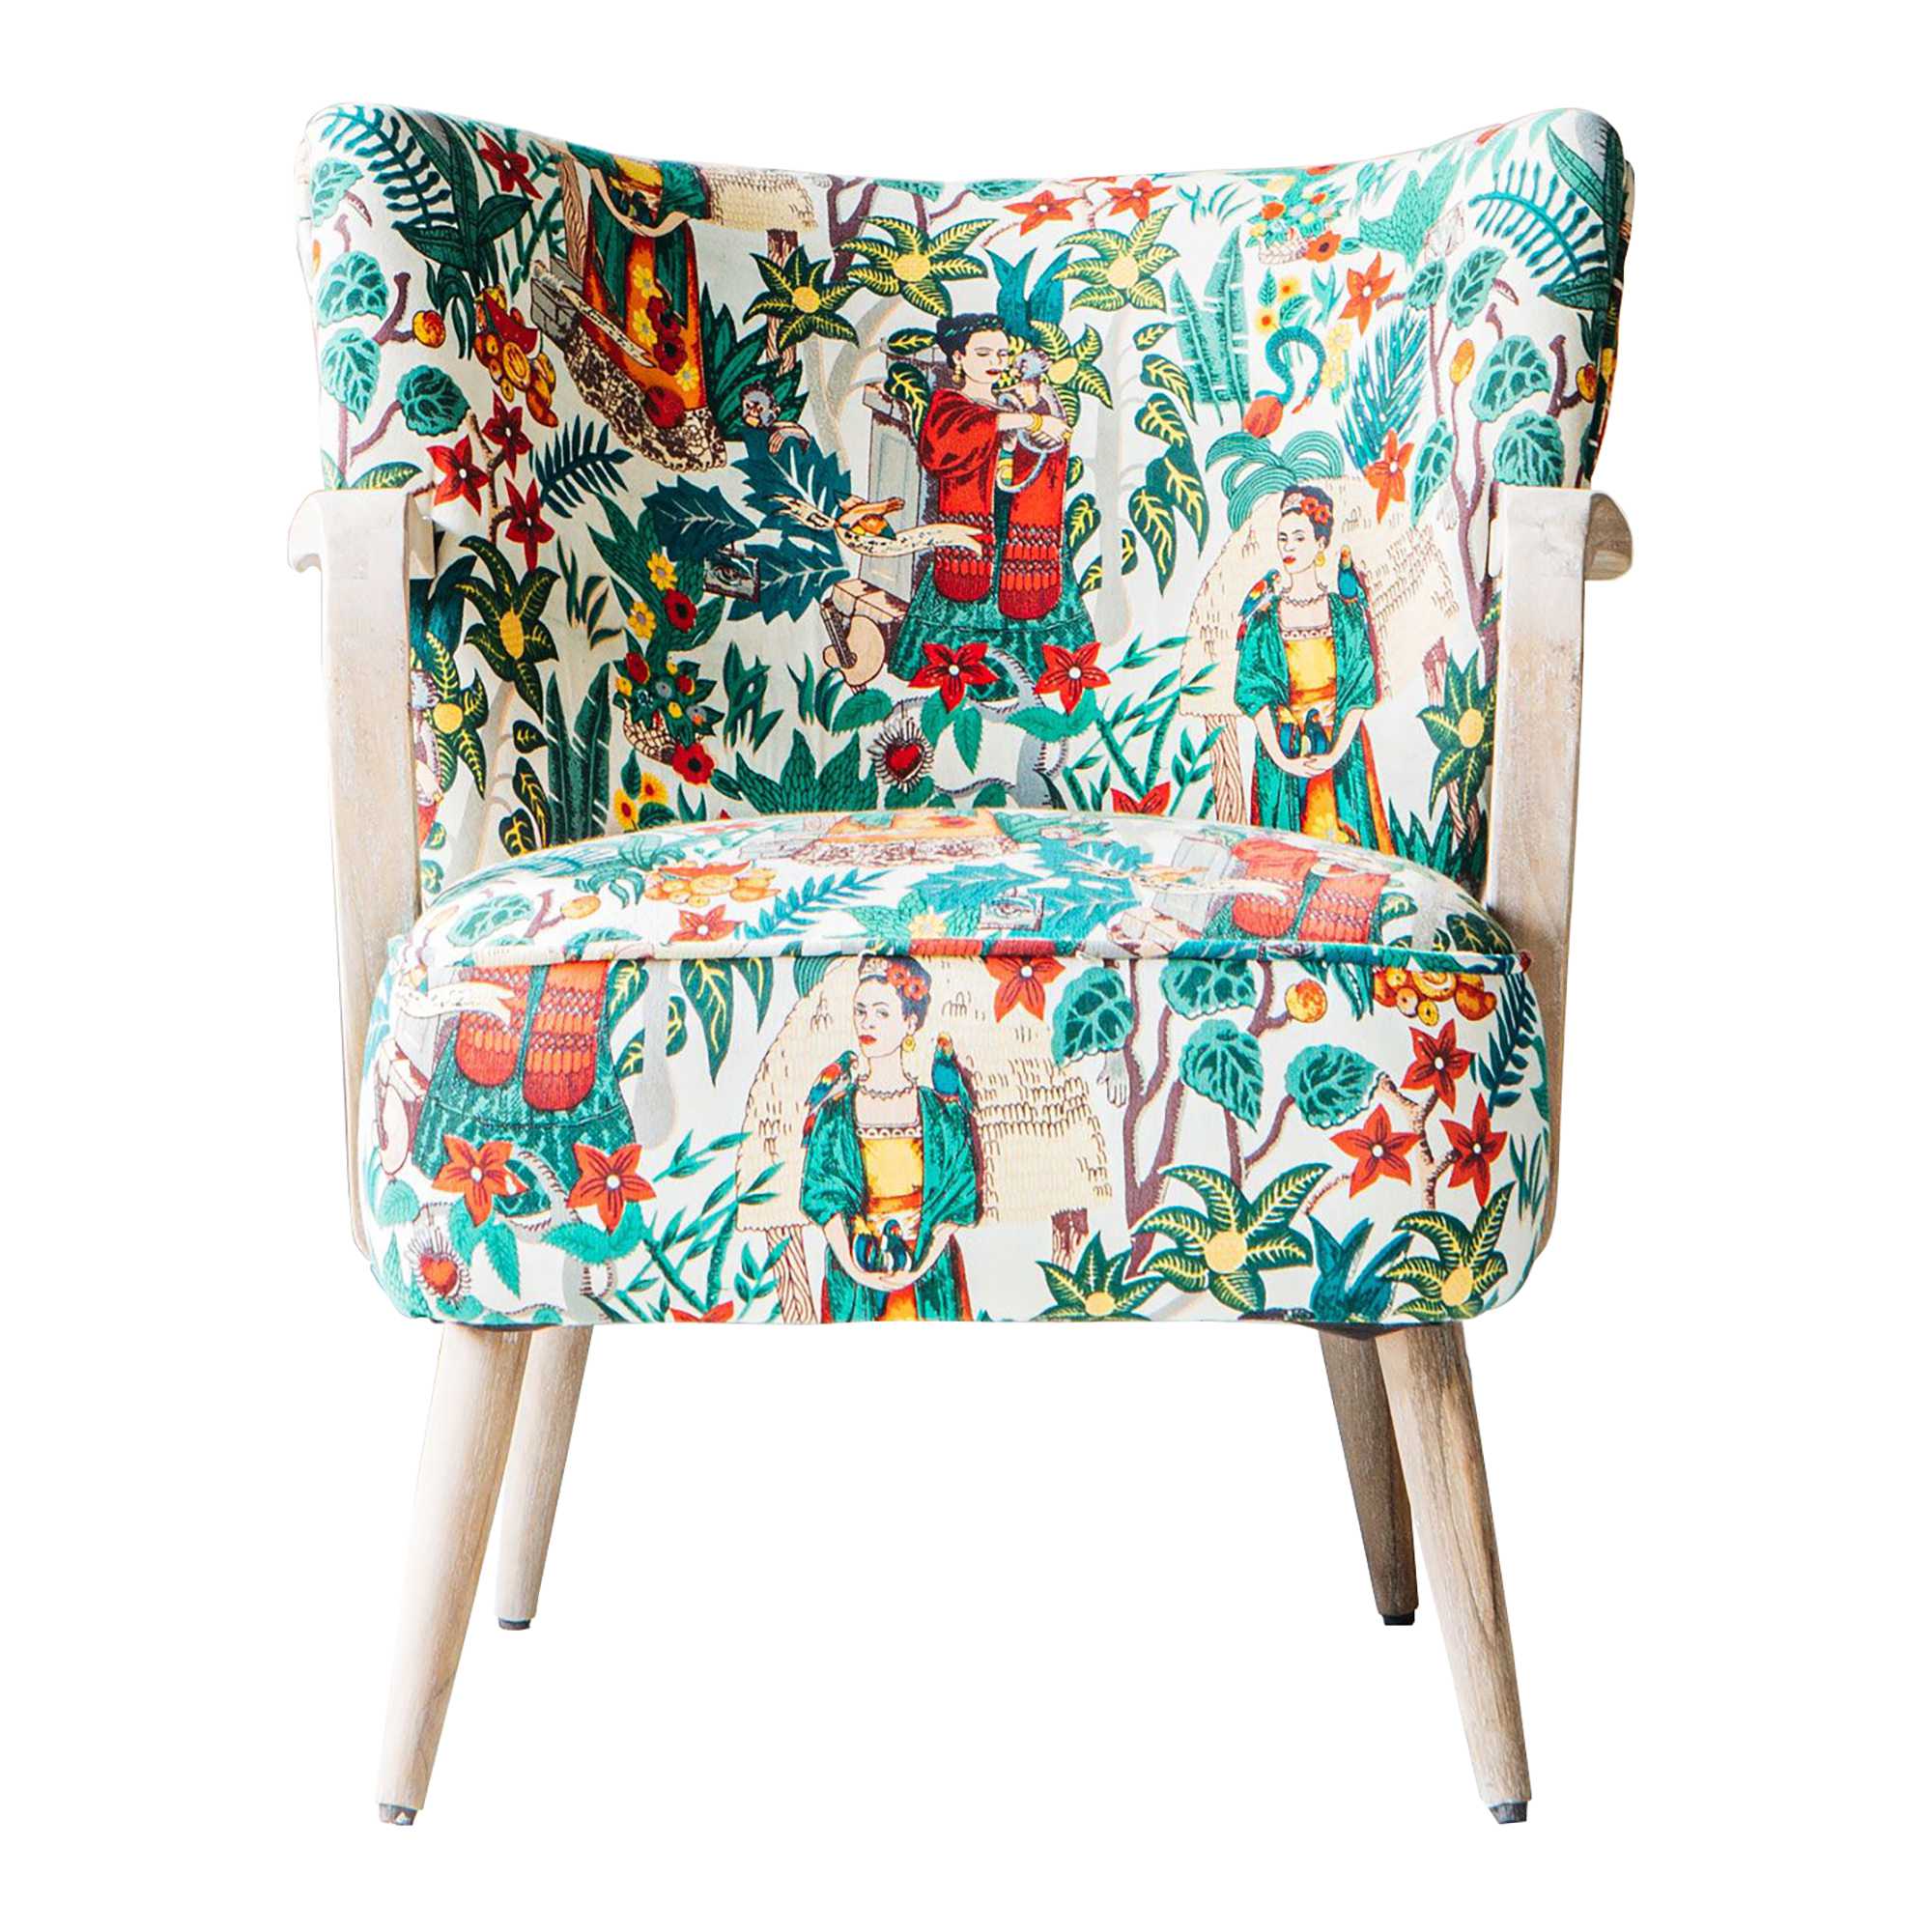 Lina Mexicana Multi-colour Upholstered Wood Armchair